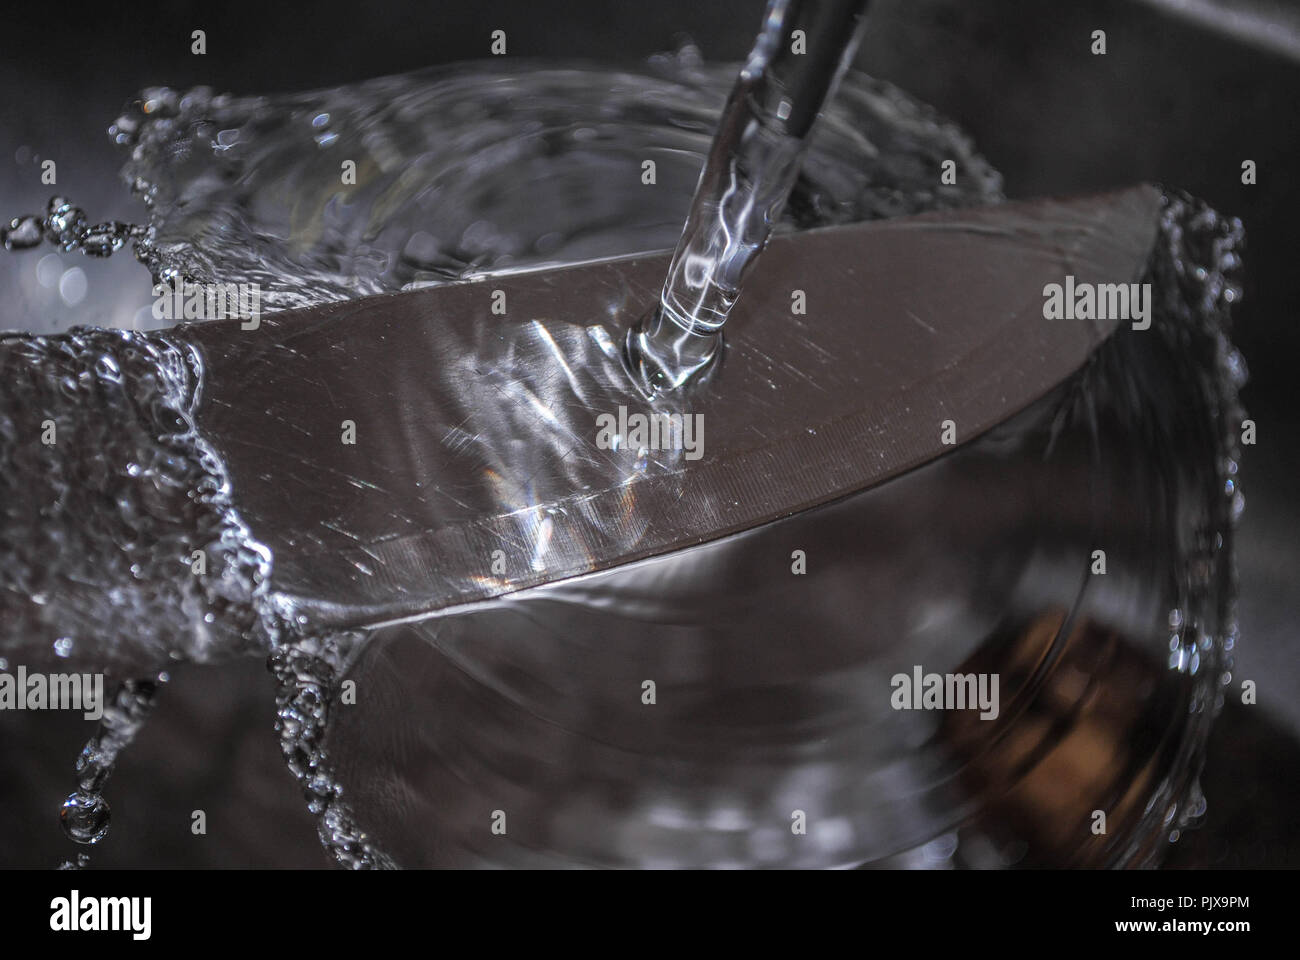 Washing a knife under a water stream Stock Photo